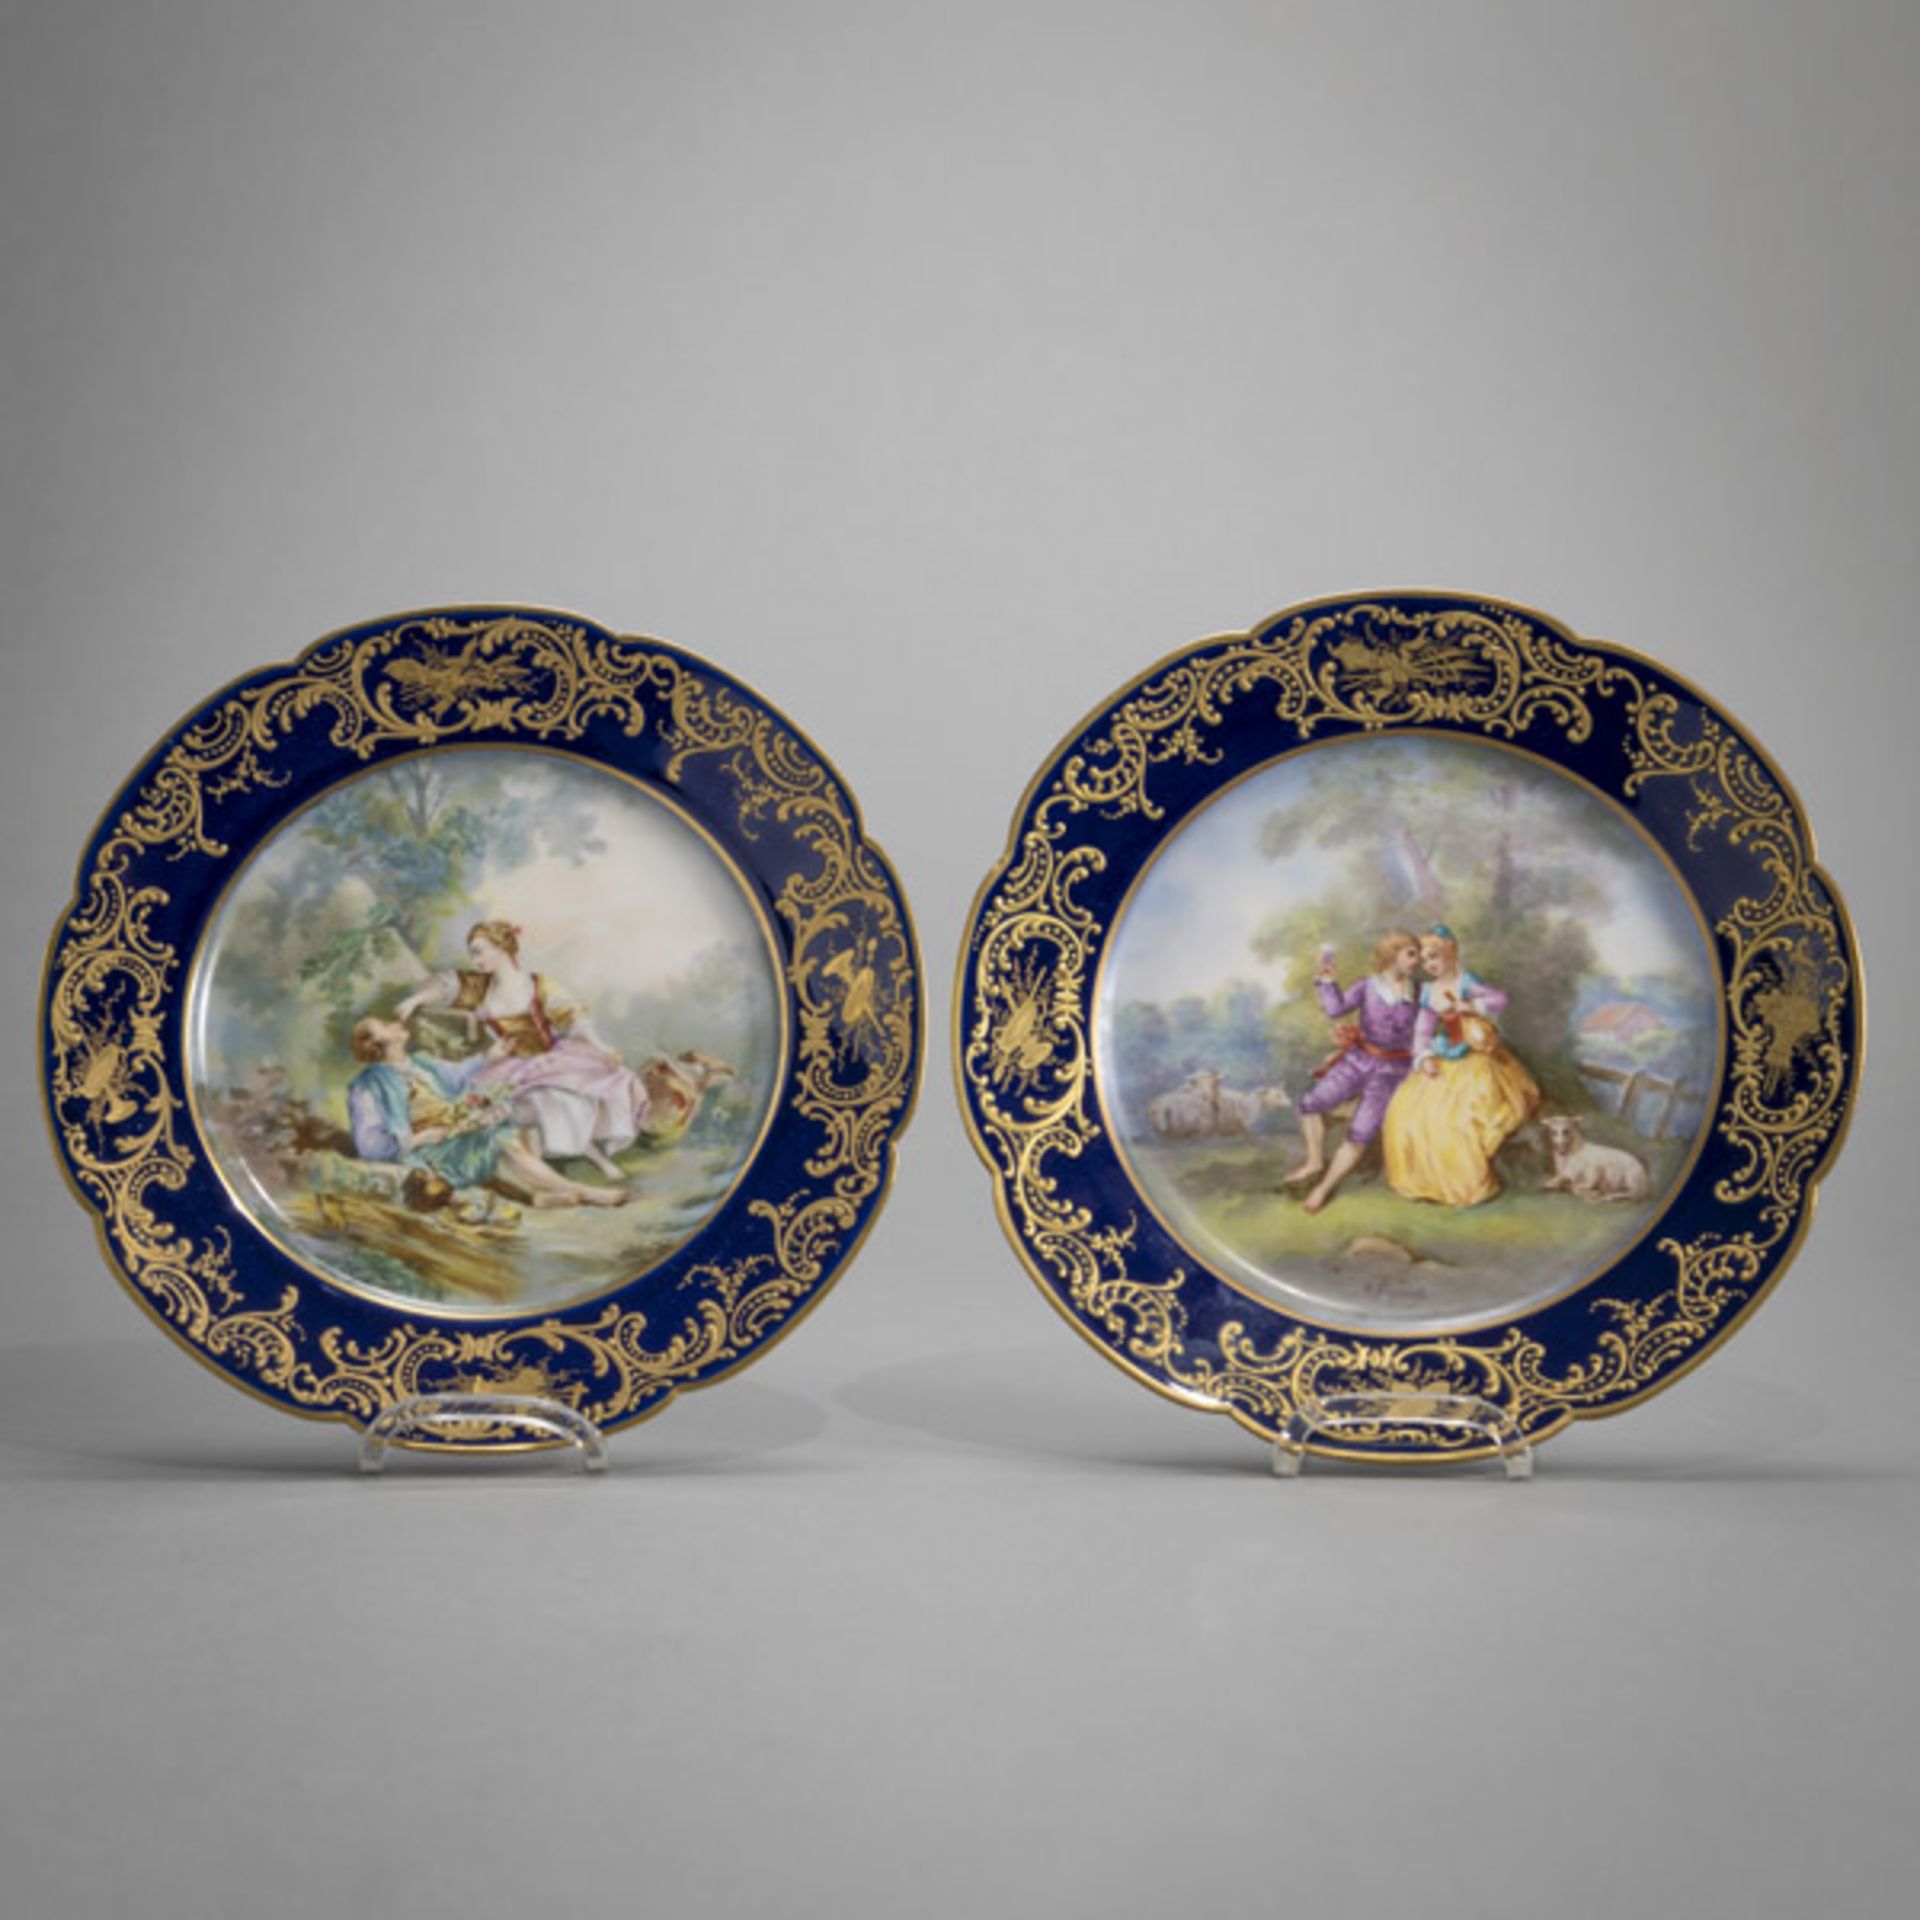 TWO LIMOGES PORCELAIN PLATES WITH GALLANTRY SCENES